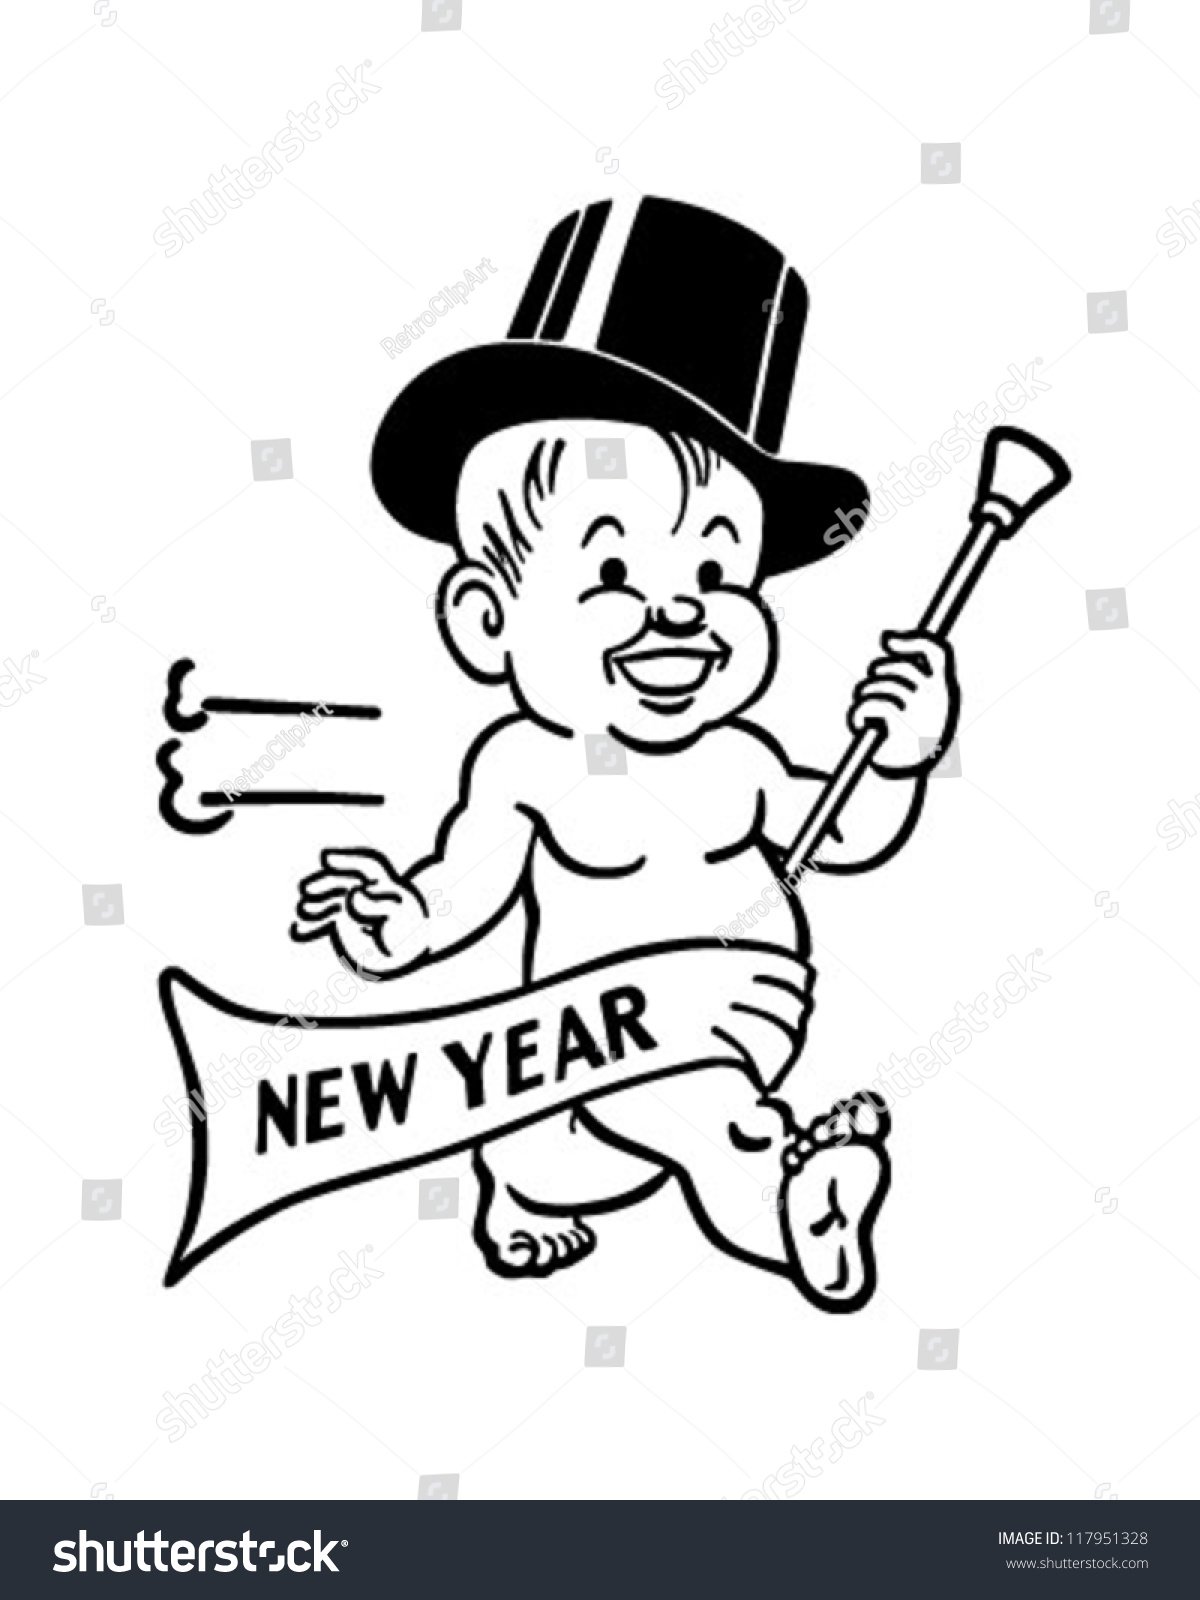 new year's baby clipart - photo #41